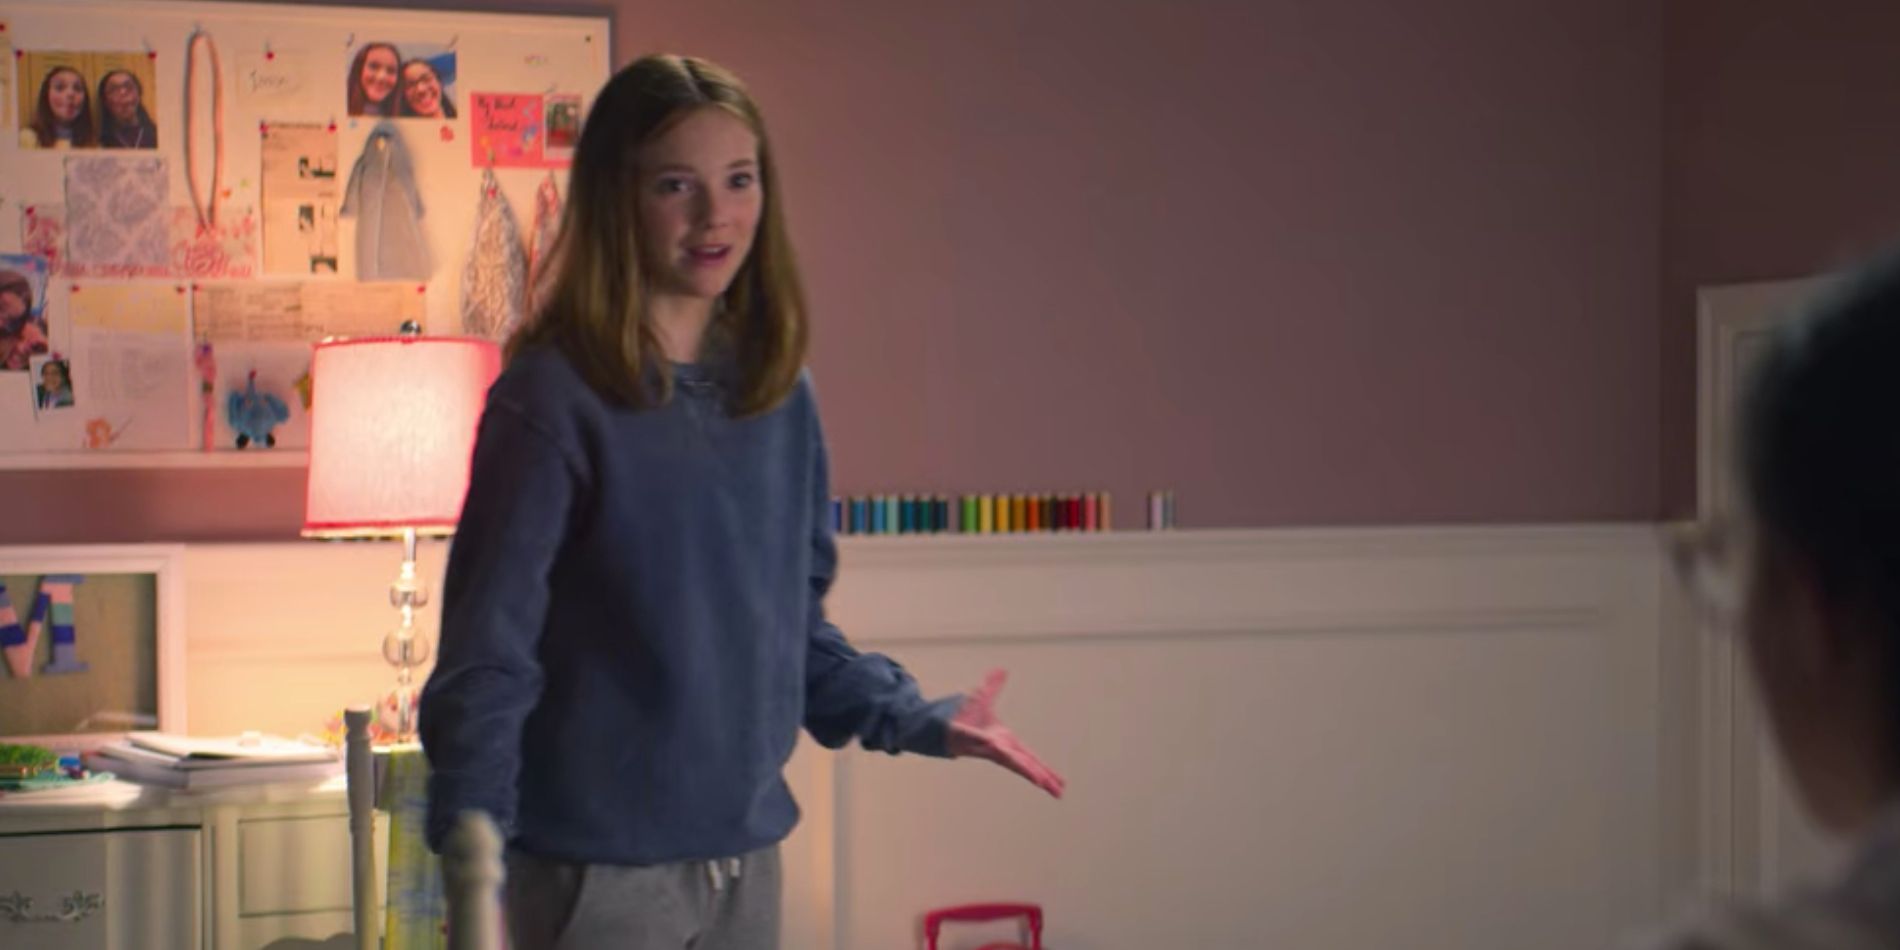 Kristy In Mary Annes Room In The Baby-Sitters Club S1E01